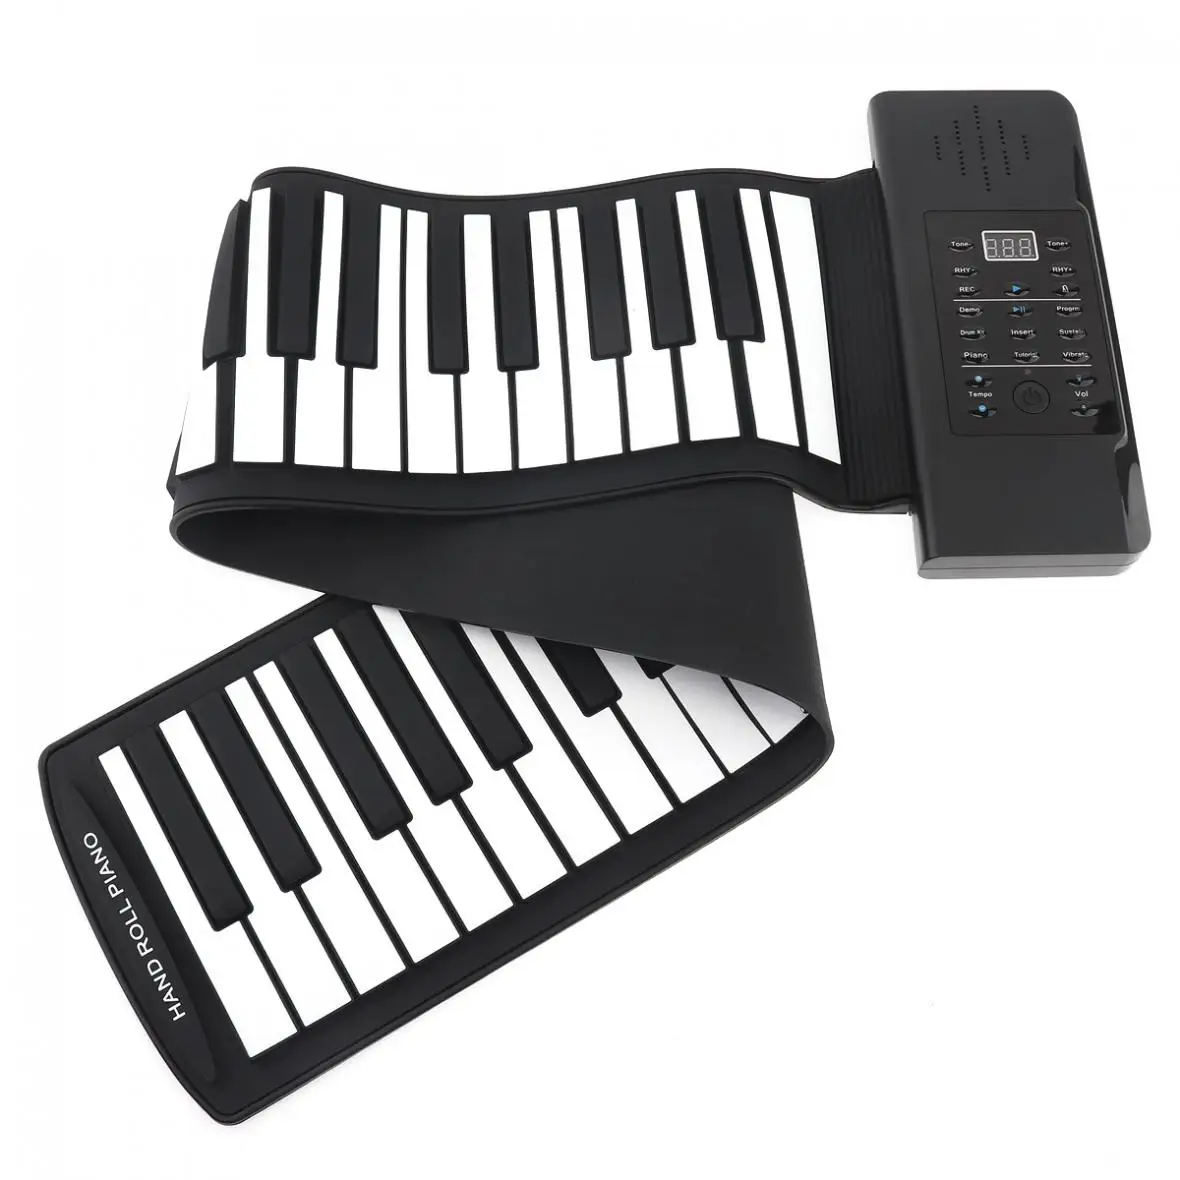 61 Keys MIDI Output Foldable Roll Up Piano Rechargeable Electronic Portable Silicone Flexible Keyboard Organ Built-in Speaker enlarge